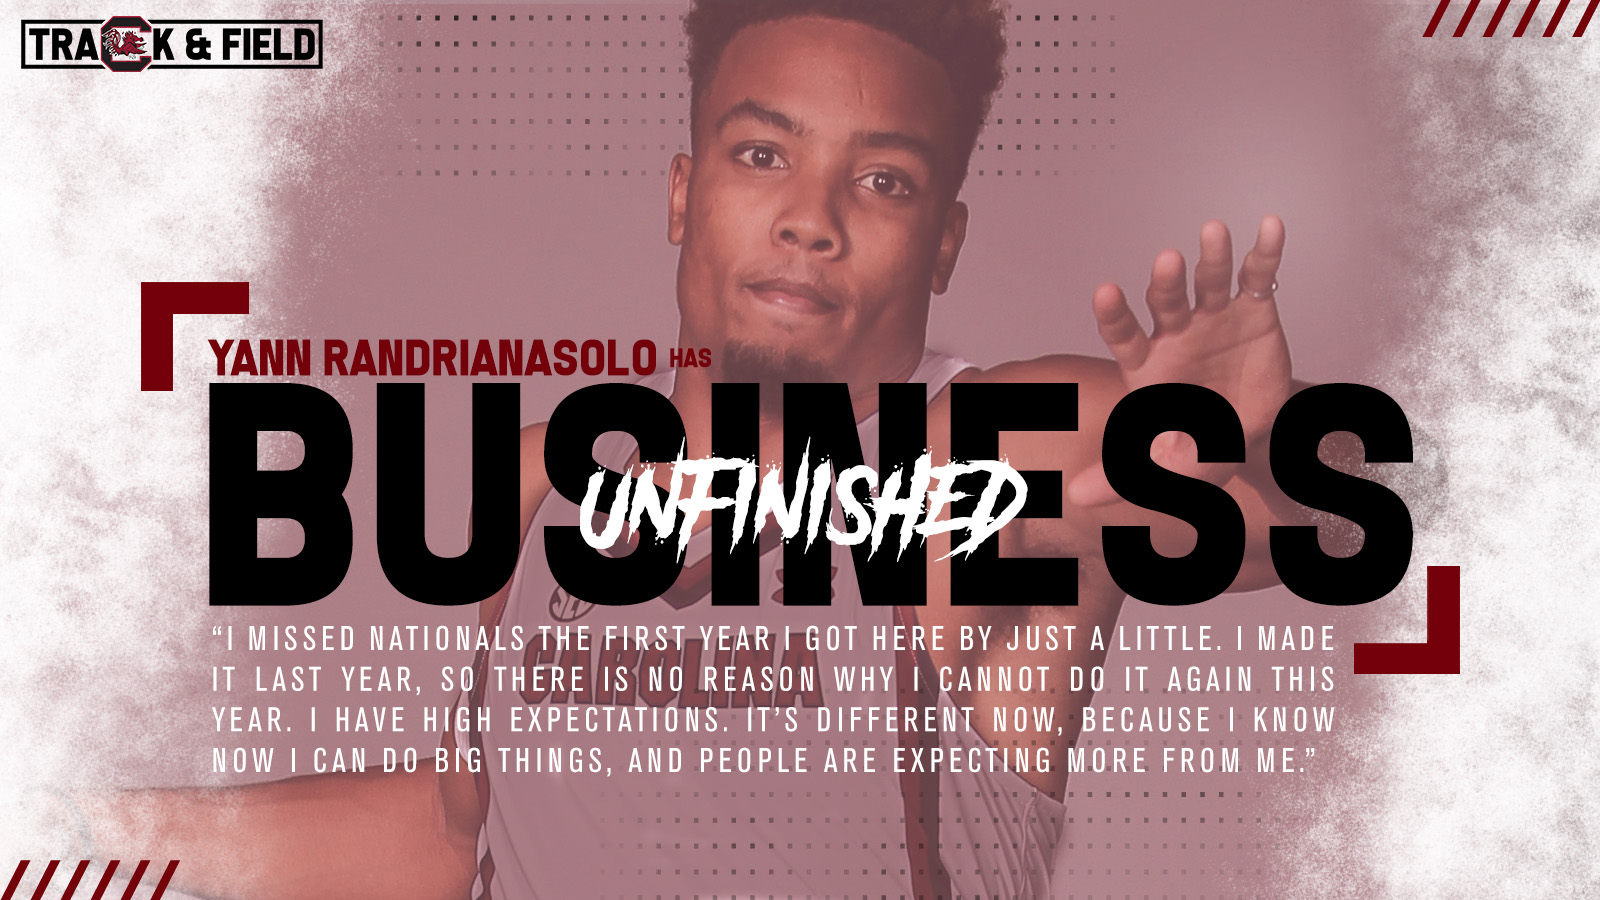 Unfinished Business: Randrianasolo is Ready to Fly in Final Season